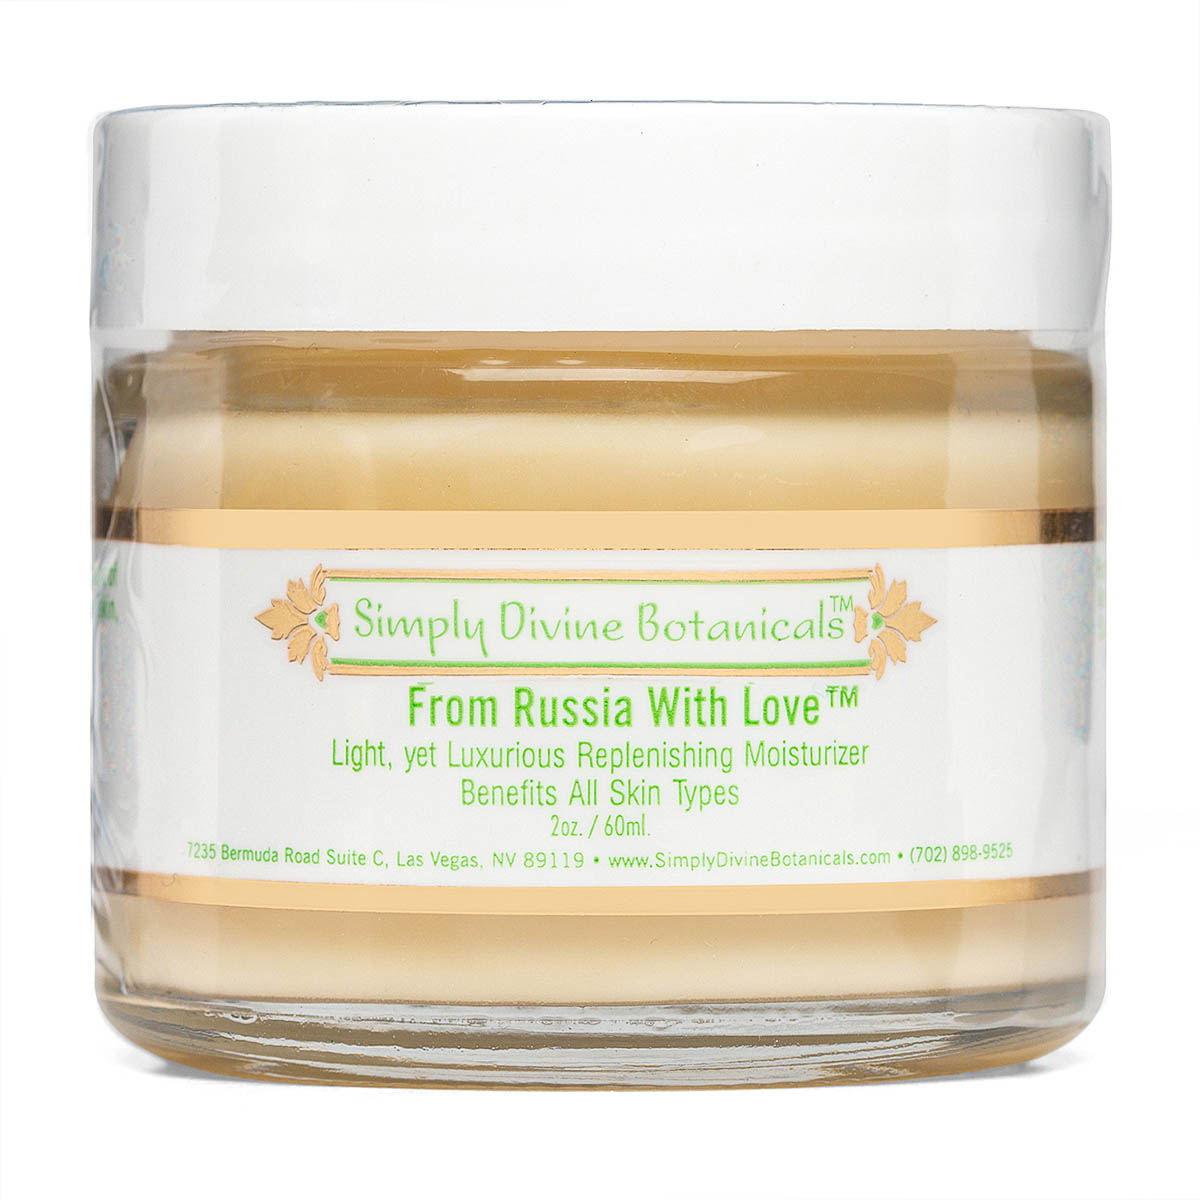 From Russia With Love Moisturizer | Simply Divine Botanicals | Raw Living UK | Skin Care &amp; Beauty | Simply Divine Botanicals Natural From Russia with Love Moisturiser for All Skin Types. Absorbs Deeply &amp; Rapidly, with no residue. Leaves Skin Soft &amp; Dewy.